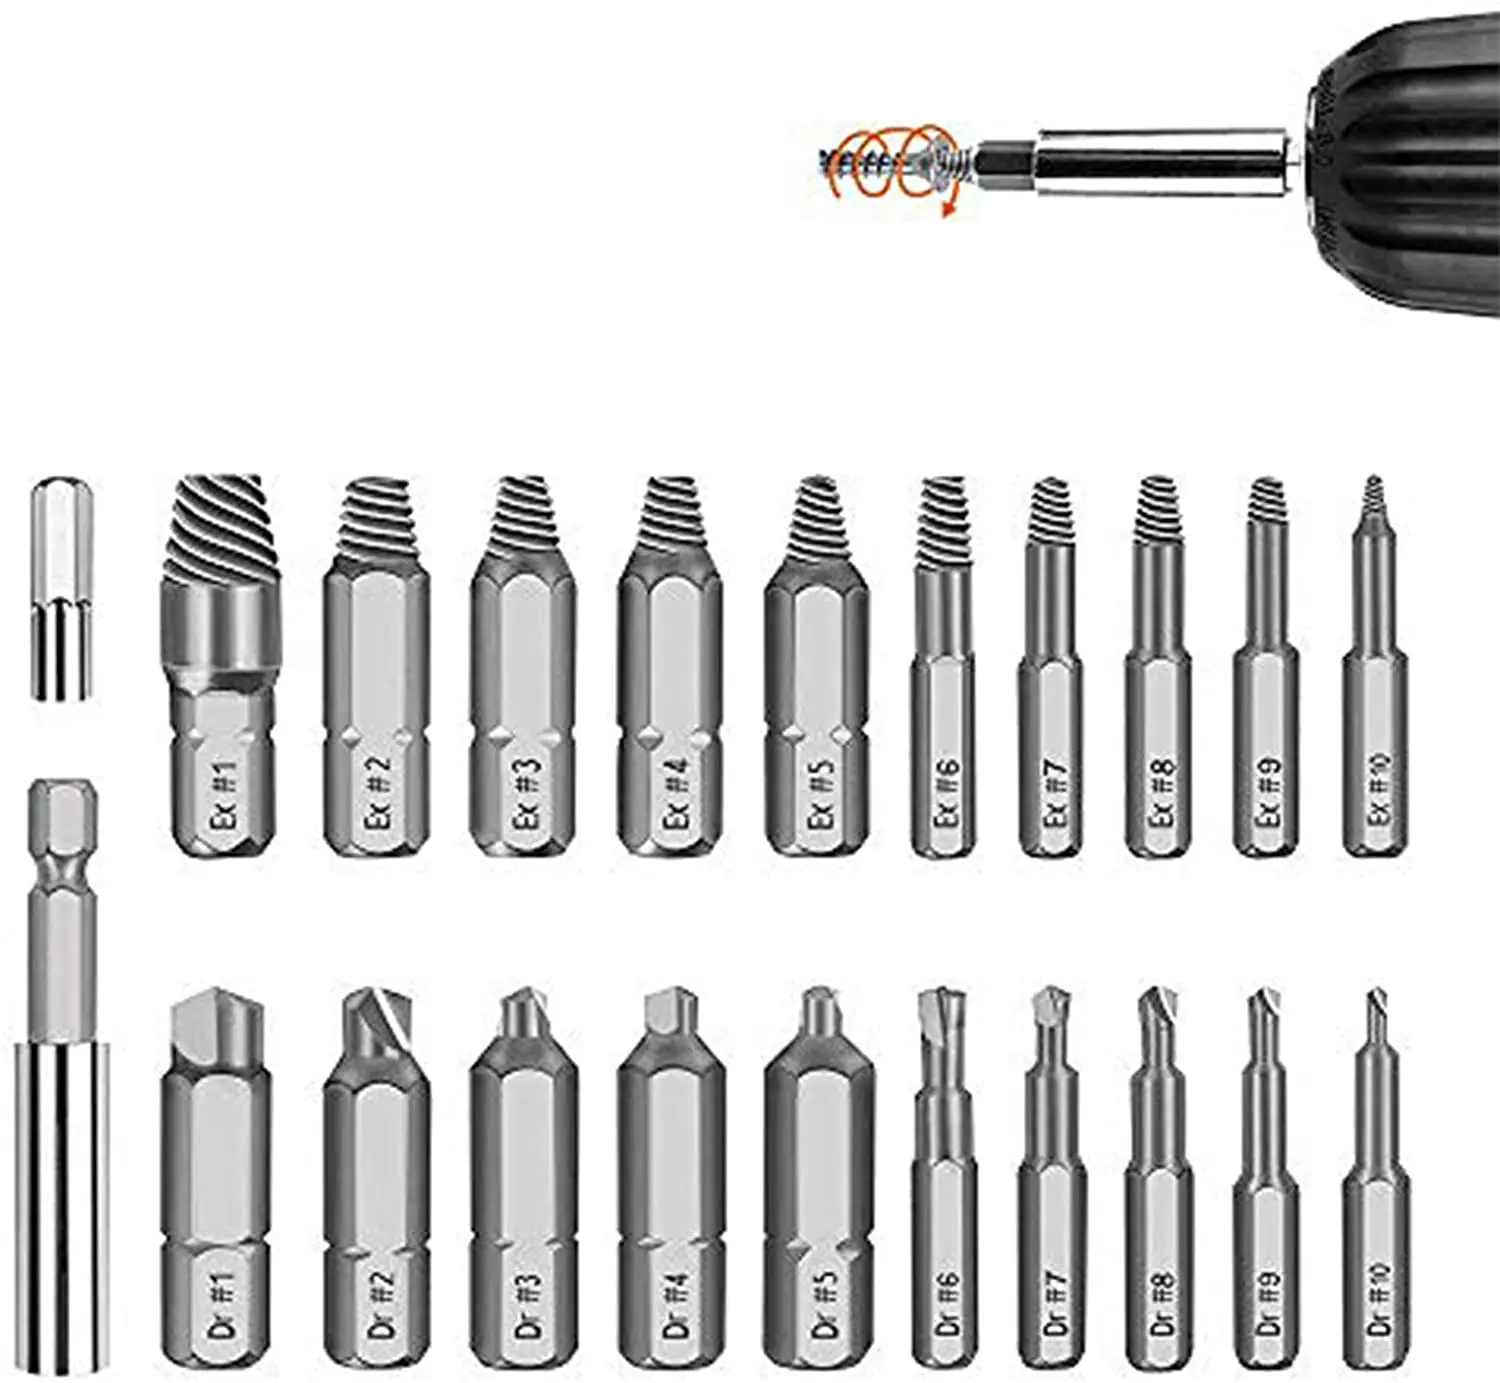 Details about   22Pcs Stripped Screw Extractor Drill Bit Set Damaged Broken Screw Removal EE 